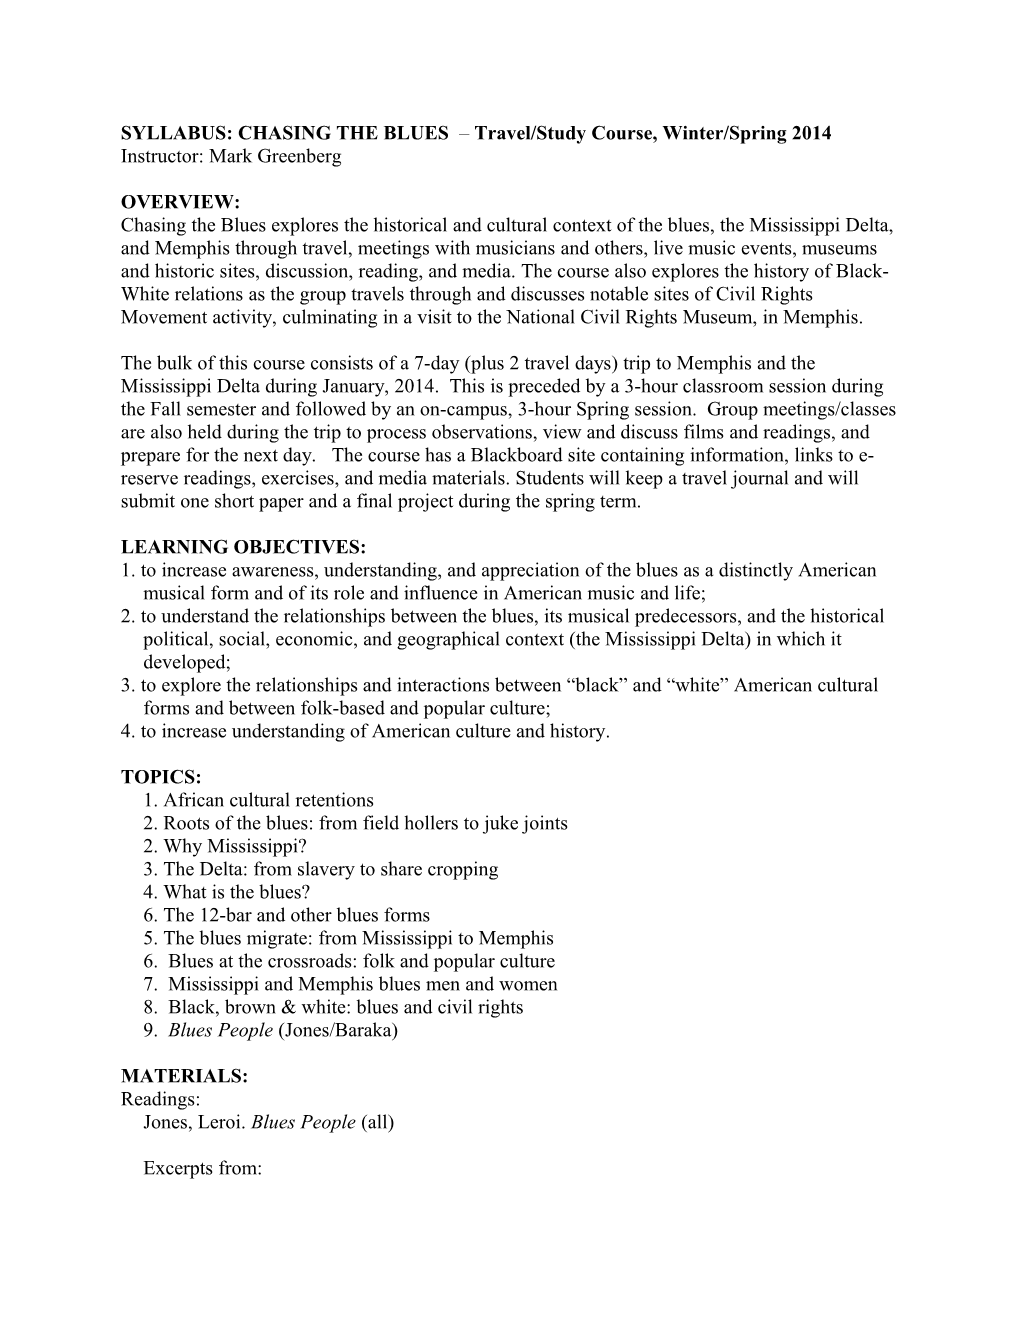 SYLLABUS: CHASING the BLUES Travel/Study Course, Winter/Spring 2014